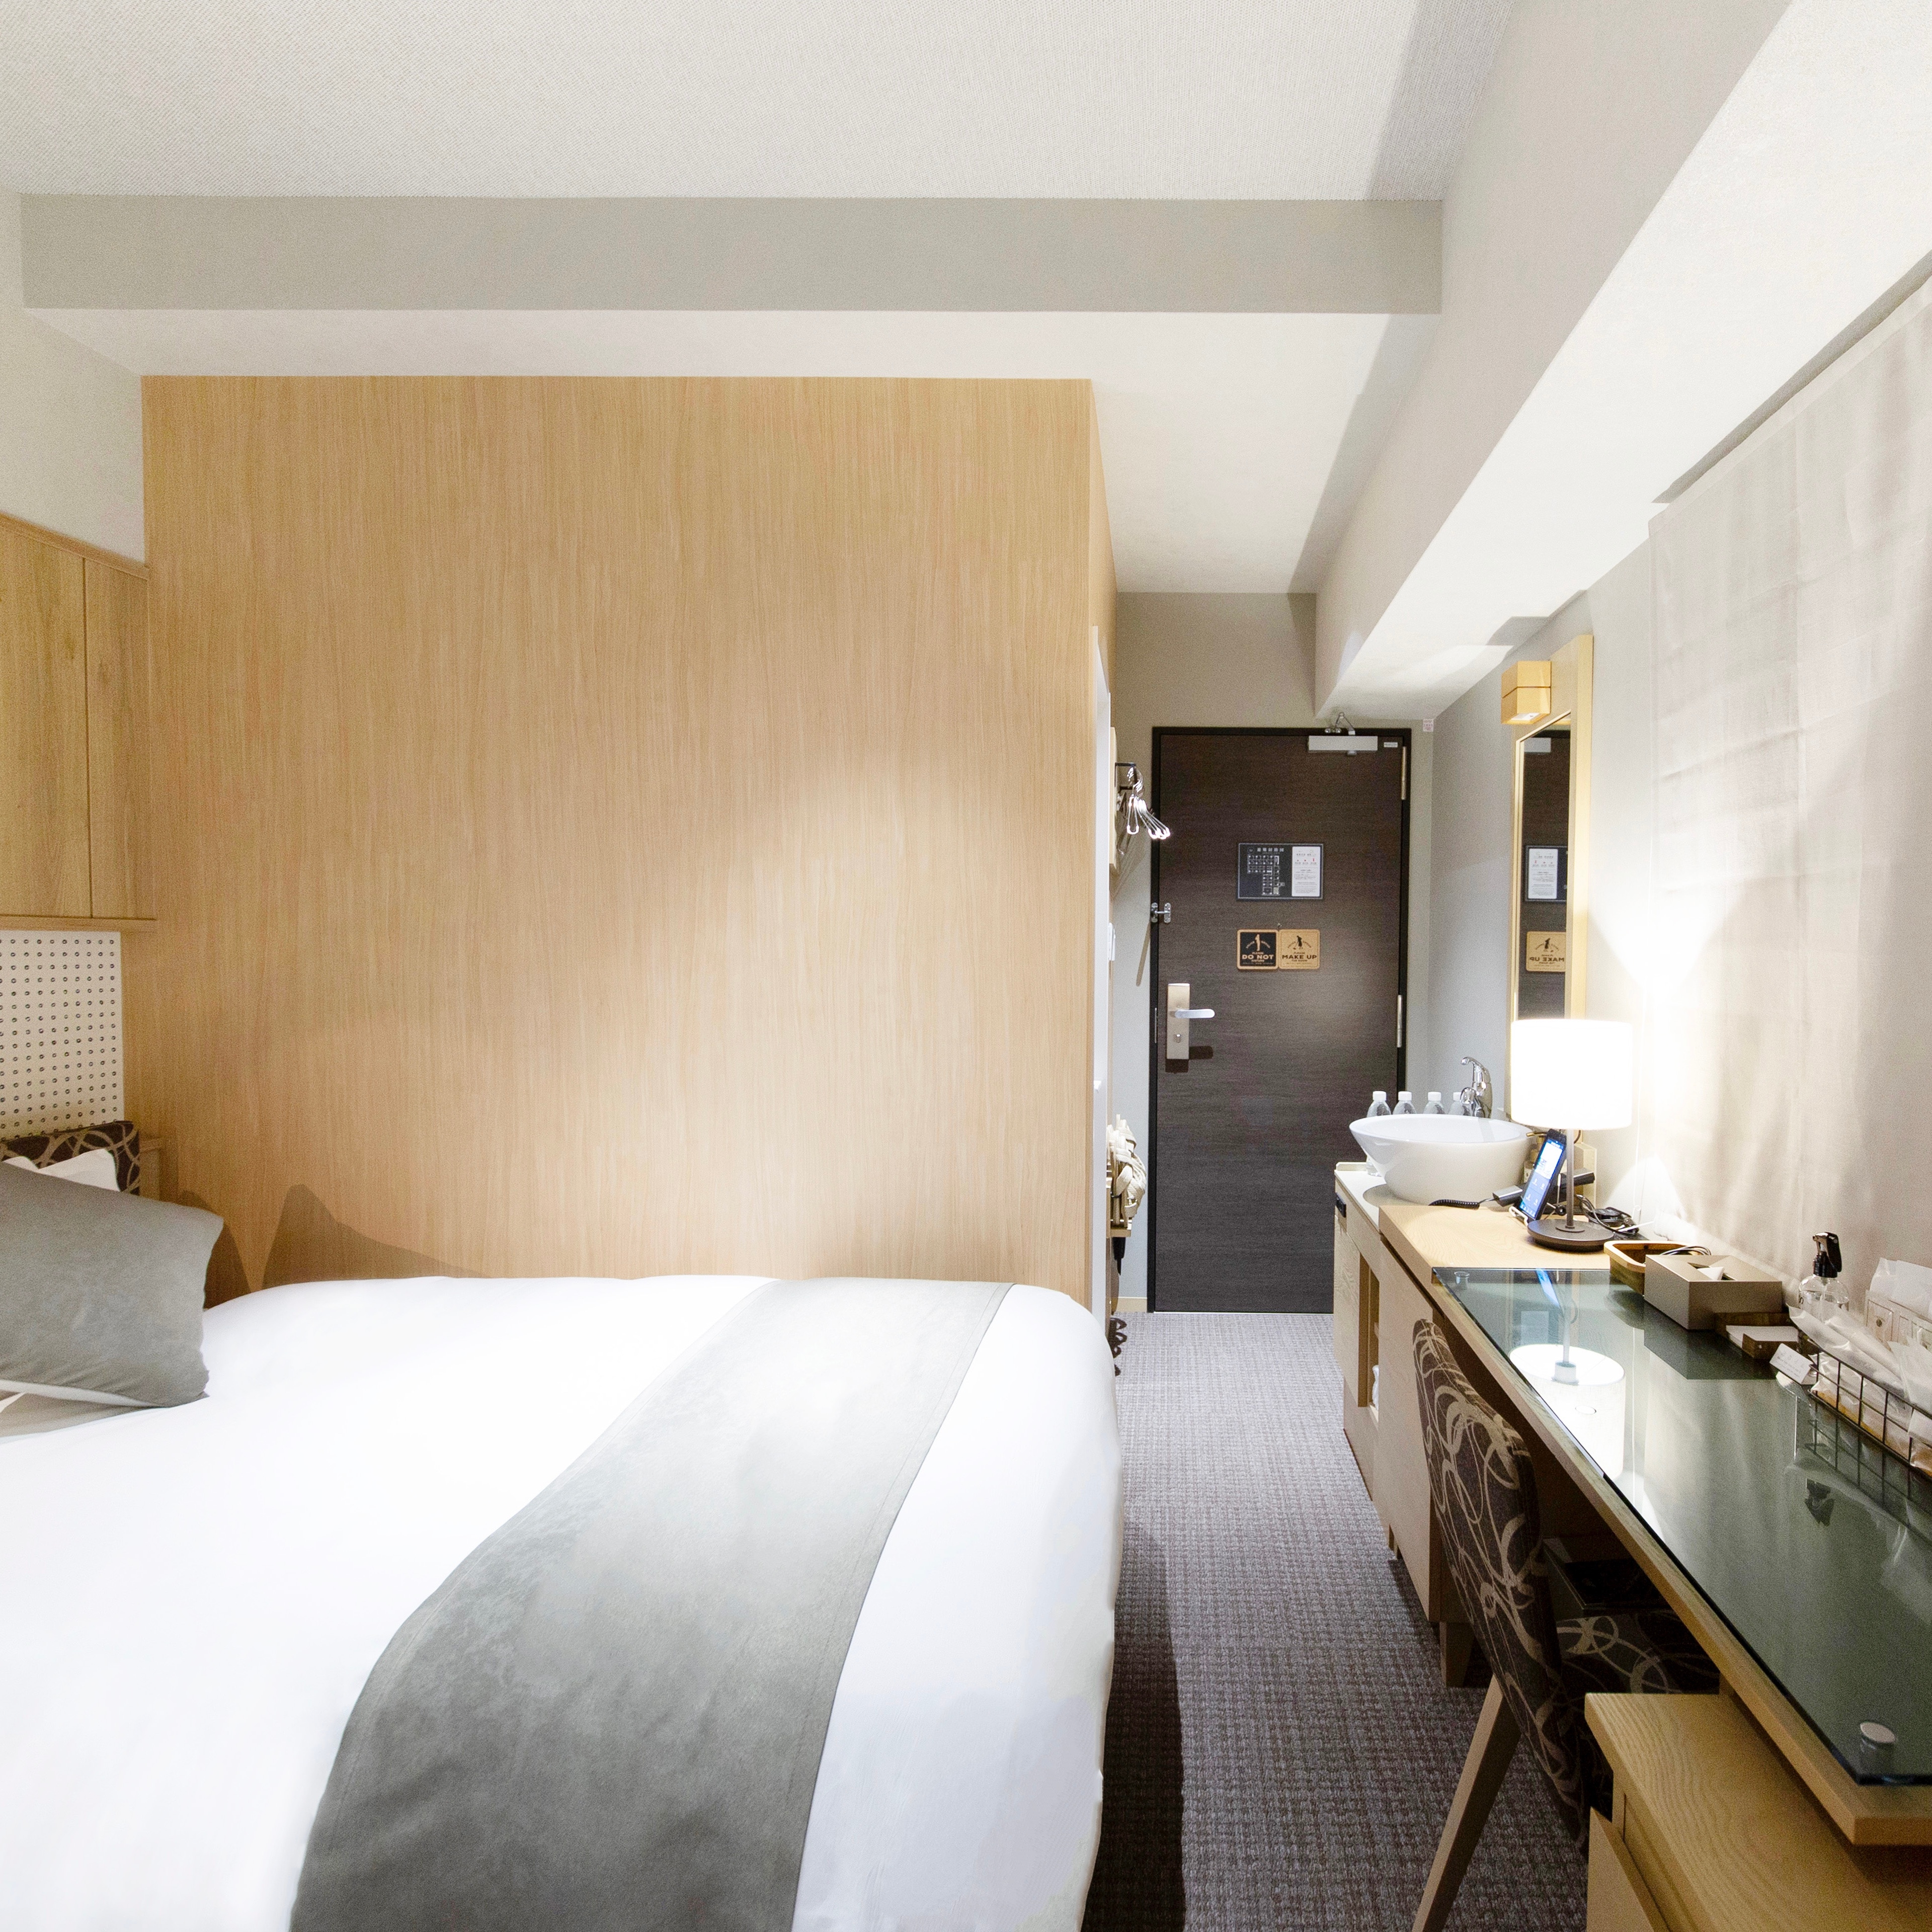 [Rooms] Superior Double Room Limited to 1 room! Amenity and facilities are also substantial ♪